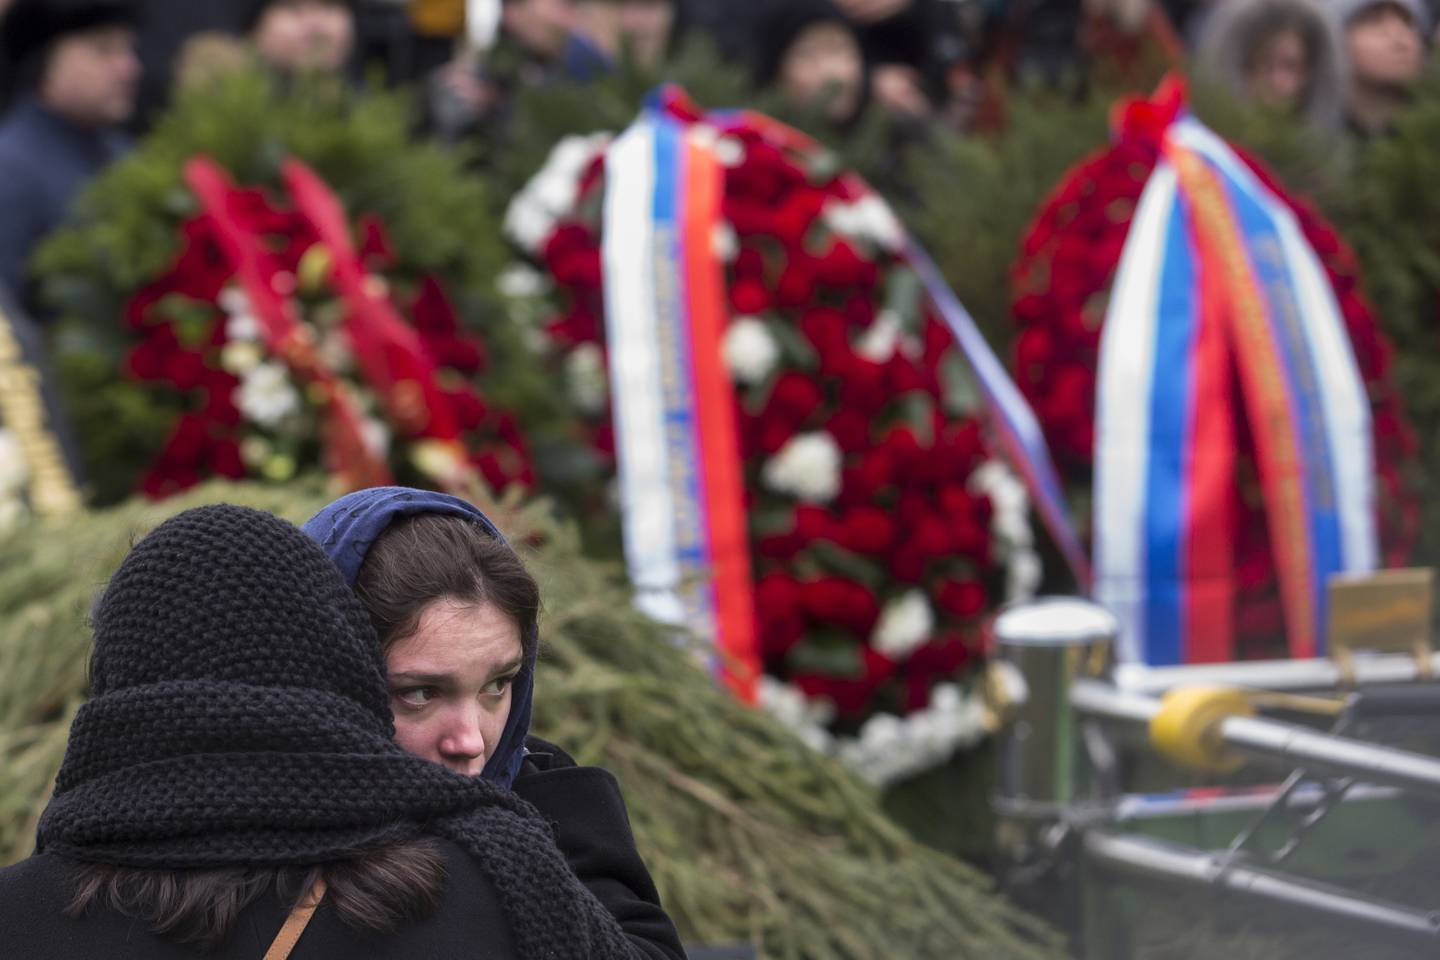 A woman comforts Boris Nemtsov's daughter Zhanna Nemtsova, second left, at the grave of Boris Nemtsov after a burial ceremony at Troekurovskoye cemetery in Moscow, Russia, Tuesday, March 3, 2015.  One by one, thousands of mourners and dignitaries filed past the white-lined coffin of slain Kremlin critic Boris Nemtsov on Tuesday, many offering flowers as they paid their last respects to one of the most prominent figures of Russia's beleaguered opposition. (AP Photo/Denis Tyrin)